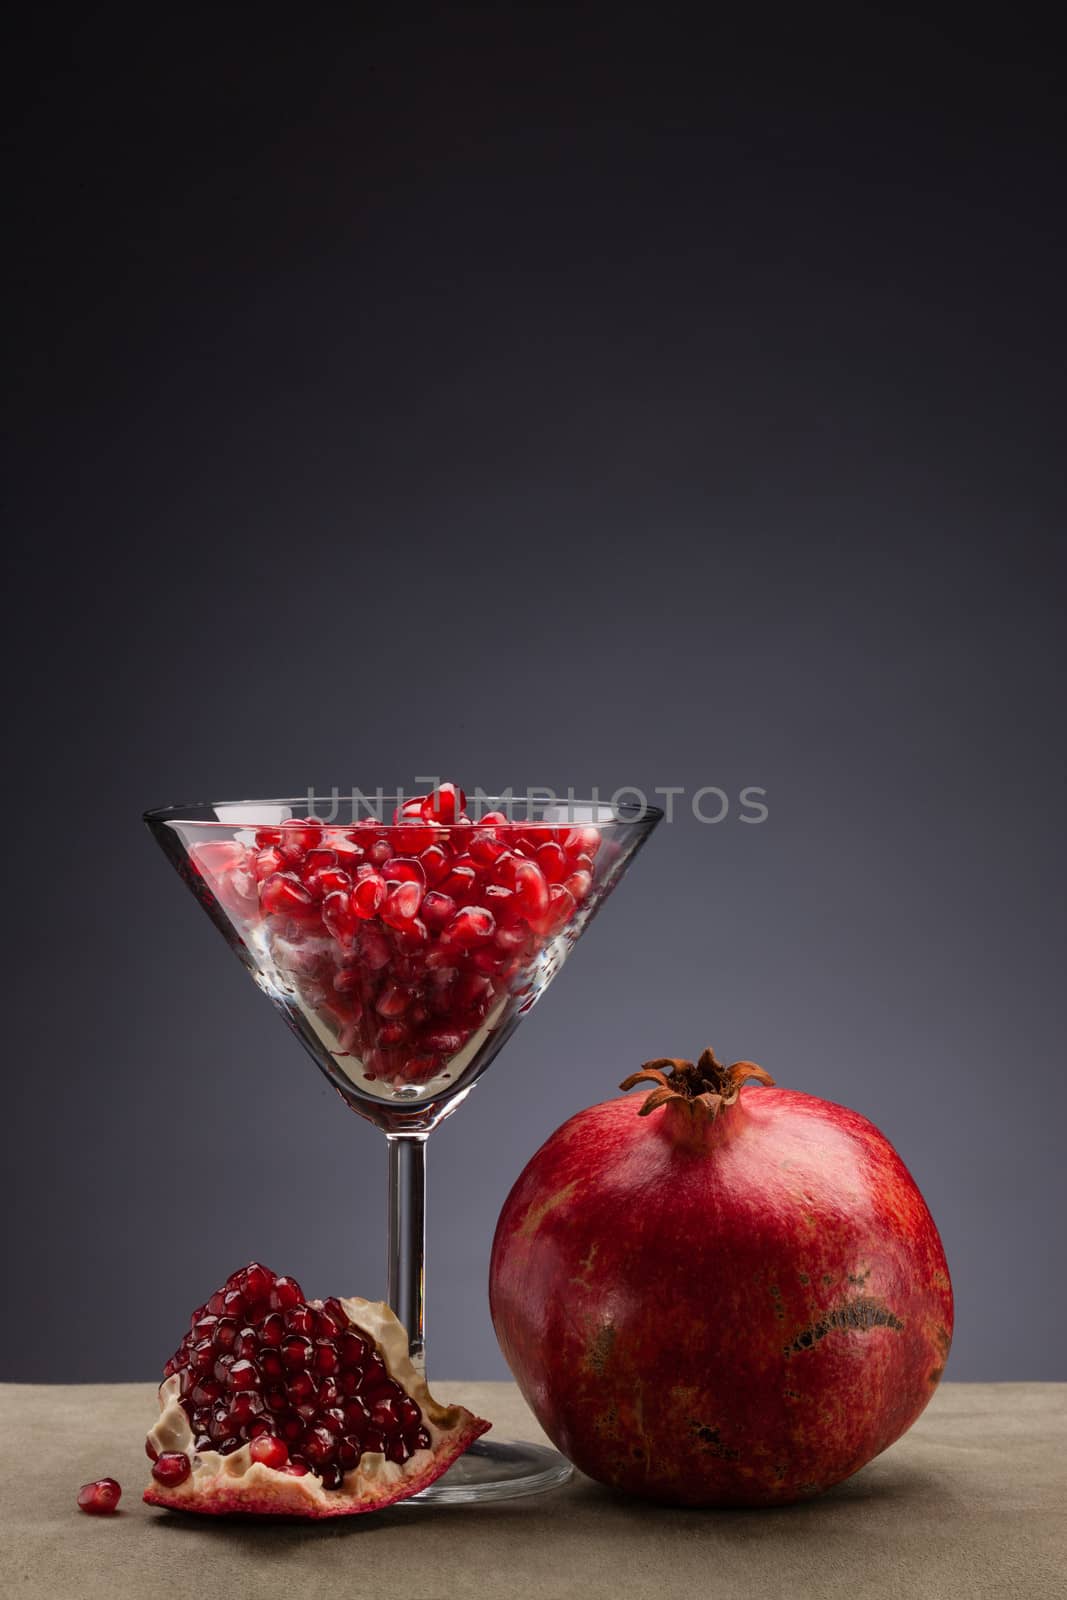 pomegranate by agg